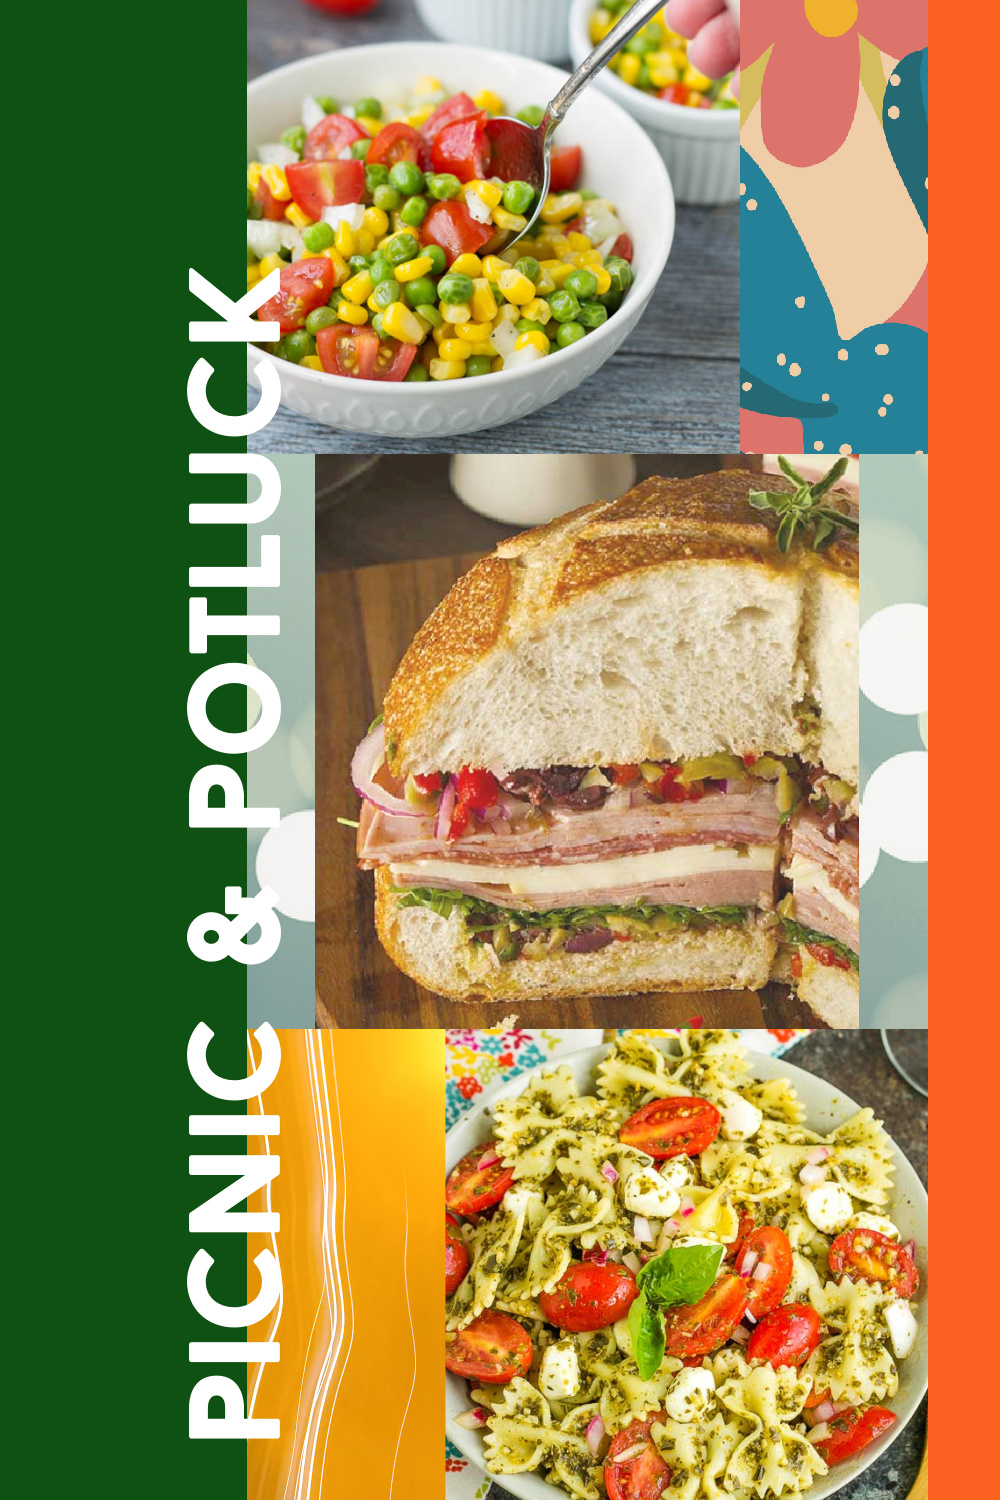 10+ Must-have Picnic and Potluck Recipes to Make this Summer. These recipes are easy and delicious. They are perfect to enjoy whether you’re out with a special someone, a group of friends, or your kids.